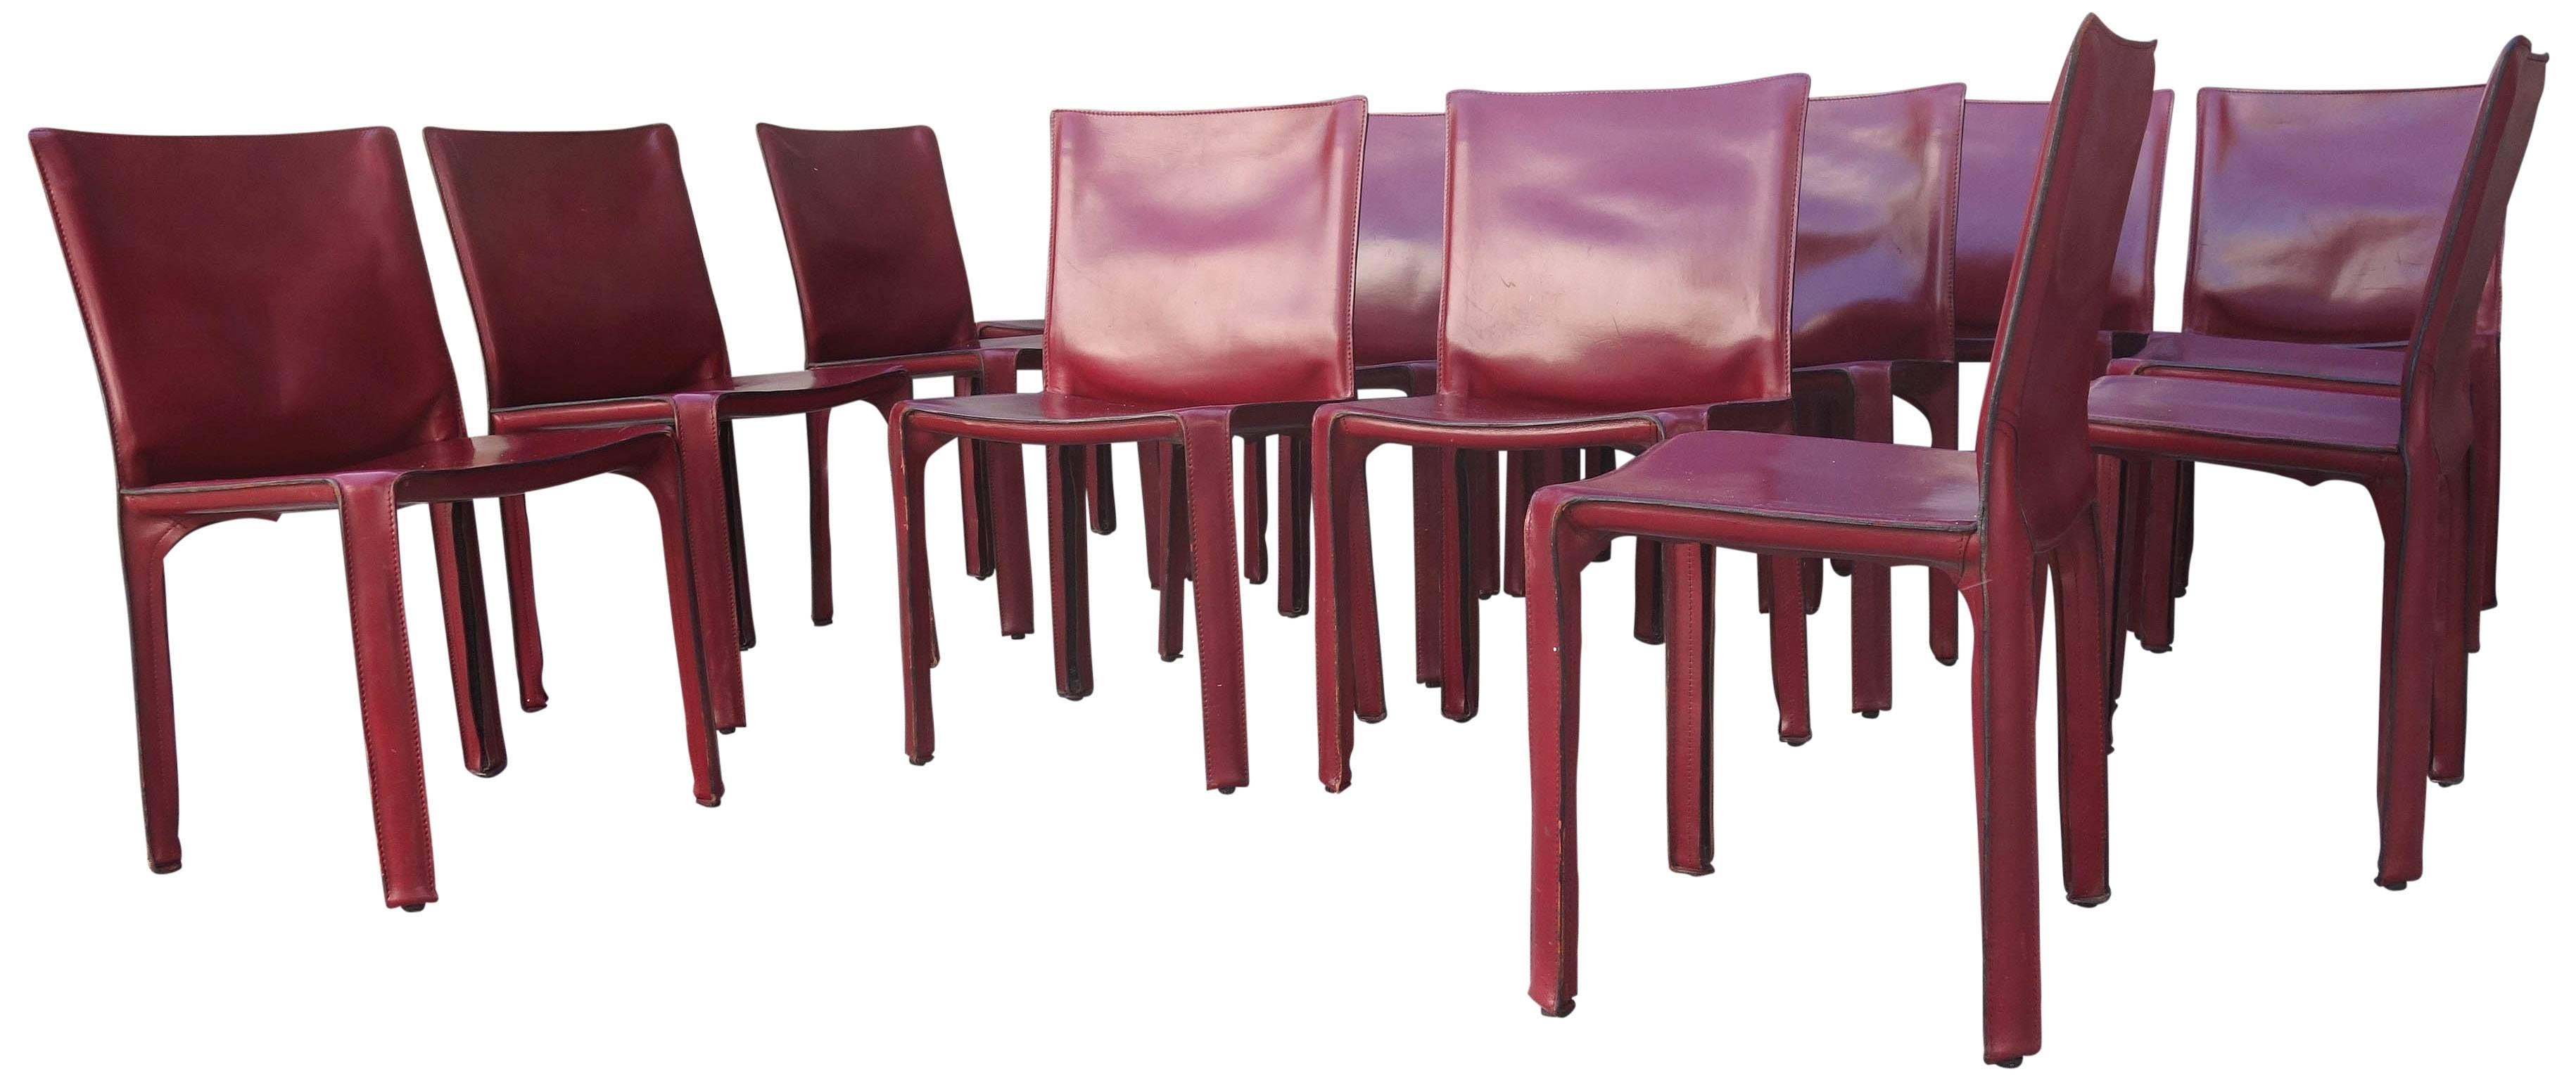 Midcentury Cassina Cab Chairs by Mario Bellini 1